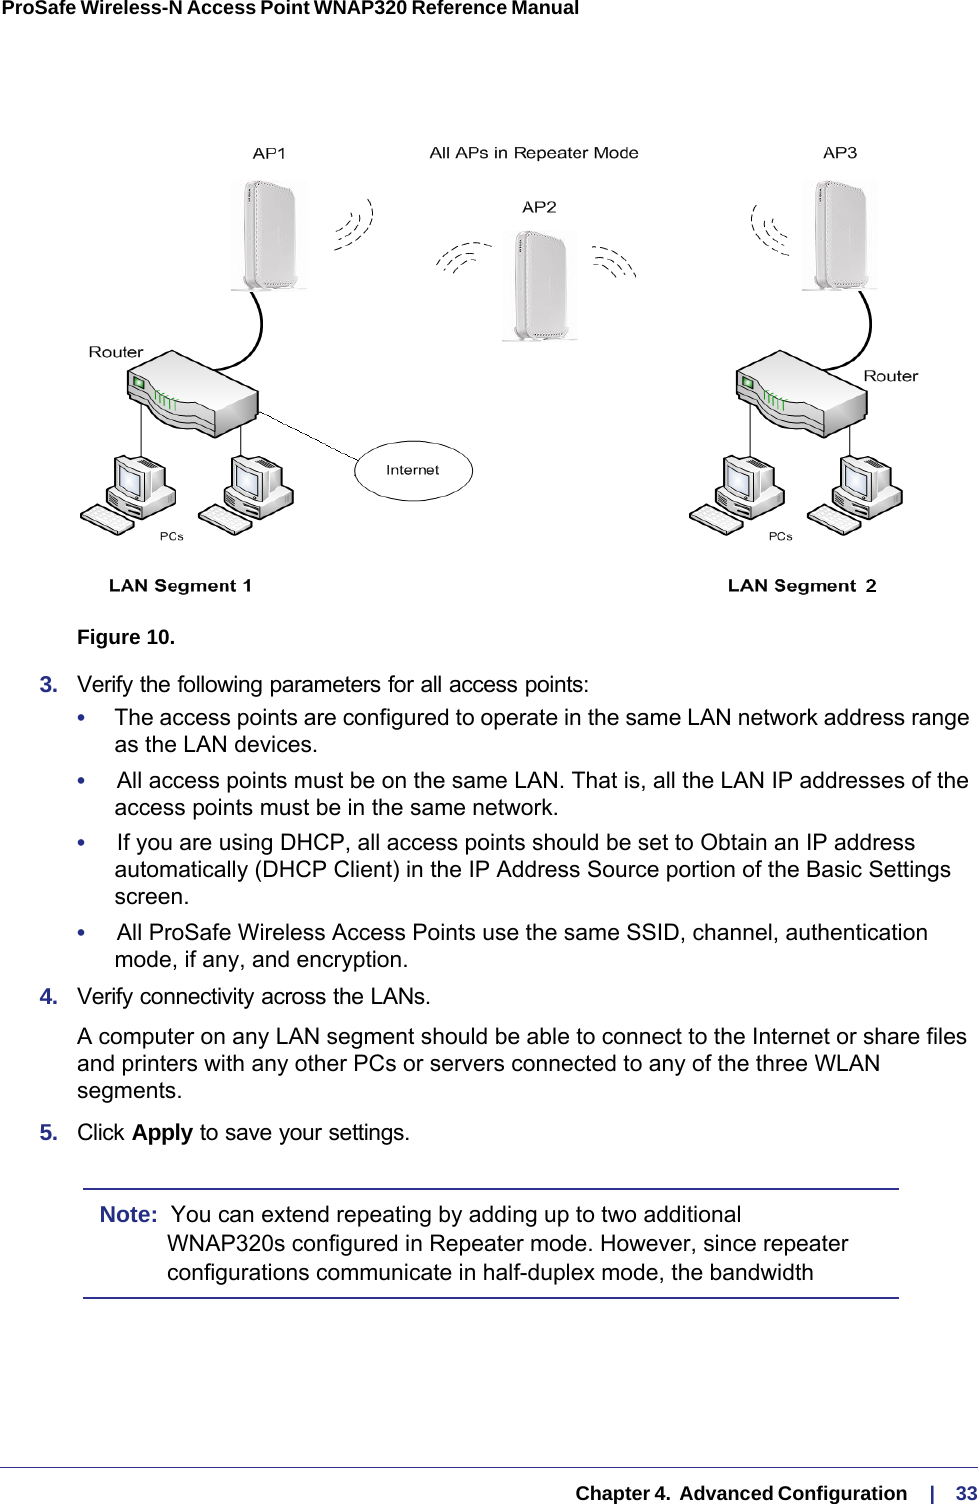   Chapter 4.  Advanced Configuration     |    33ProSafe Wireless-N Access Point WNAP320 Reference Manual Figure 10.  3.  Verify the following parameters for all access points:•     The access points are configured to operate in the same LAN network address range as the LAN devices.•     All access points must be on the same LAN. That is, all the LAN IP addresses of the access points must be in the same network.•     If you are using DHCP, all access points should be set to Obtain an IP address automatically (DHCP Client) in the IP Address Source portion of the Basic Settings screen.•     All ProSafe Wireless Access Points use the same SSID, channel, authentication mode, if any, and encryption.4.  Verify connectivity across the LANs. A computer on any LAN segment should be able to connect to the Internet or share files and printers with any other PCs or servers connected to any of the three WLAN segments.5.  Click Apply to save your settings.Note:  You can extend repeating by adding up to two additional WNAP320s configured in Repeater mode. However, since repeater configurations communicate in half-duplex mode, the bandwidth 